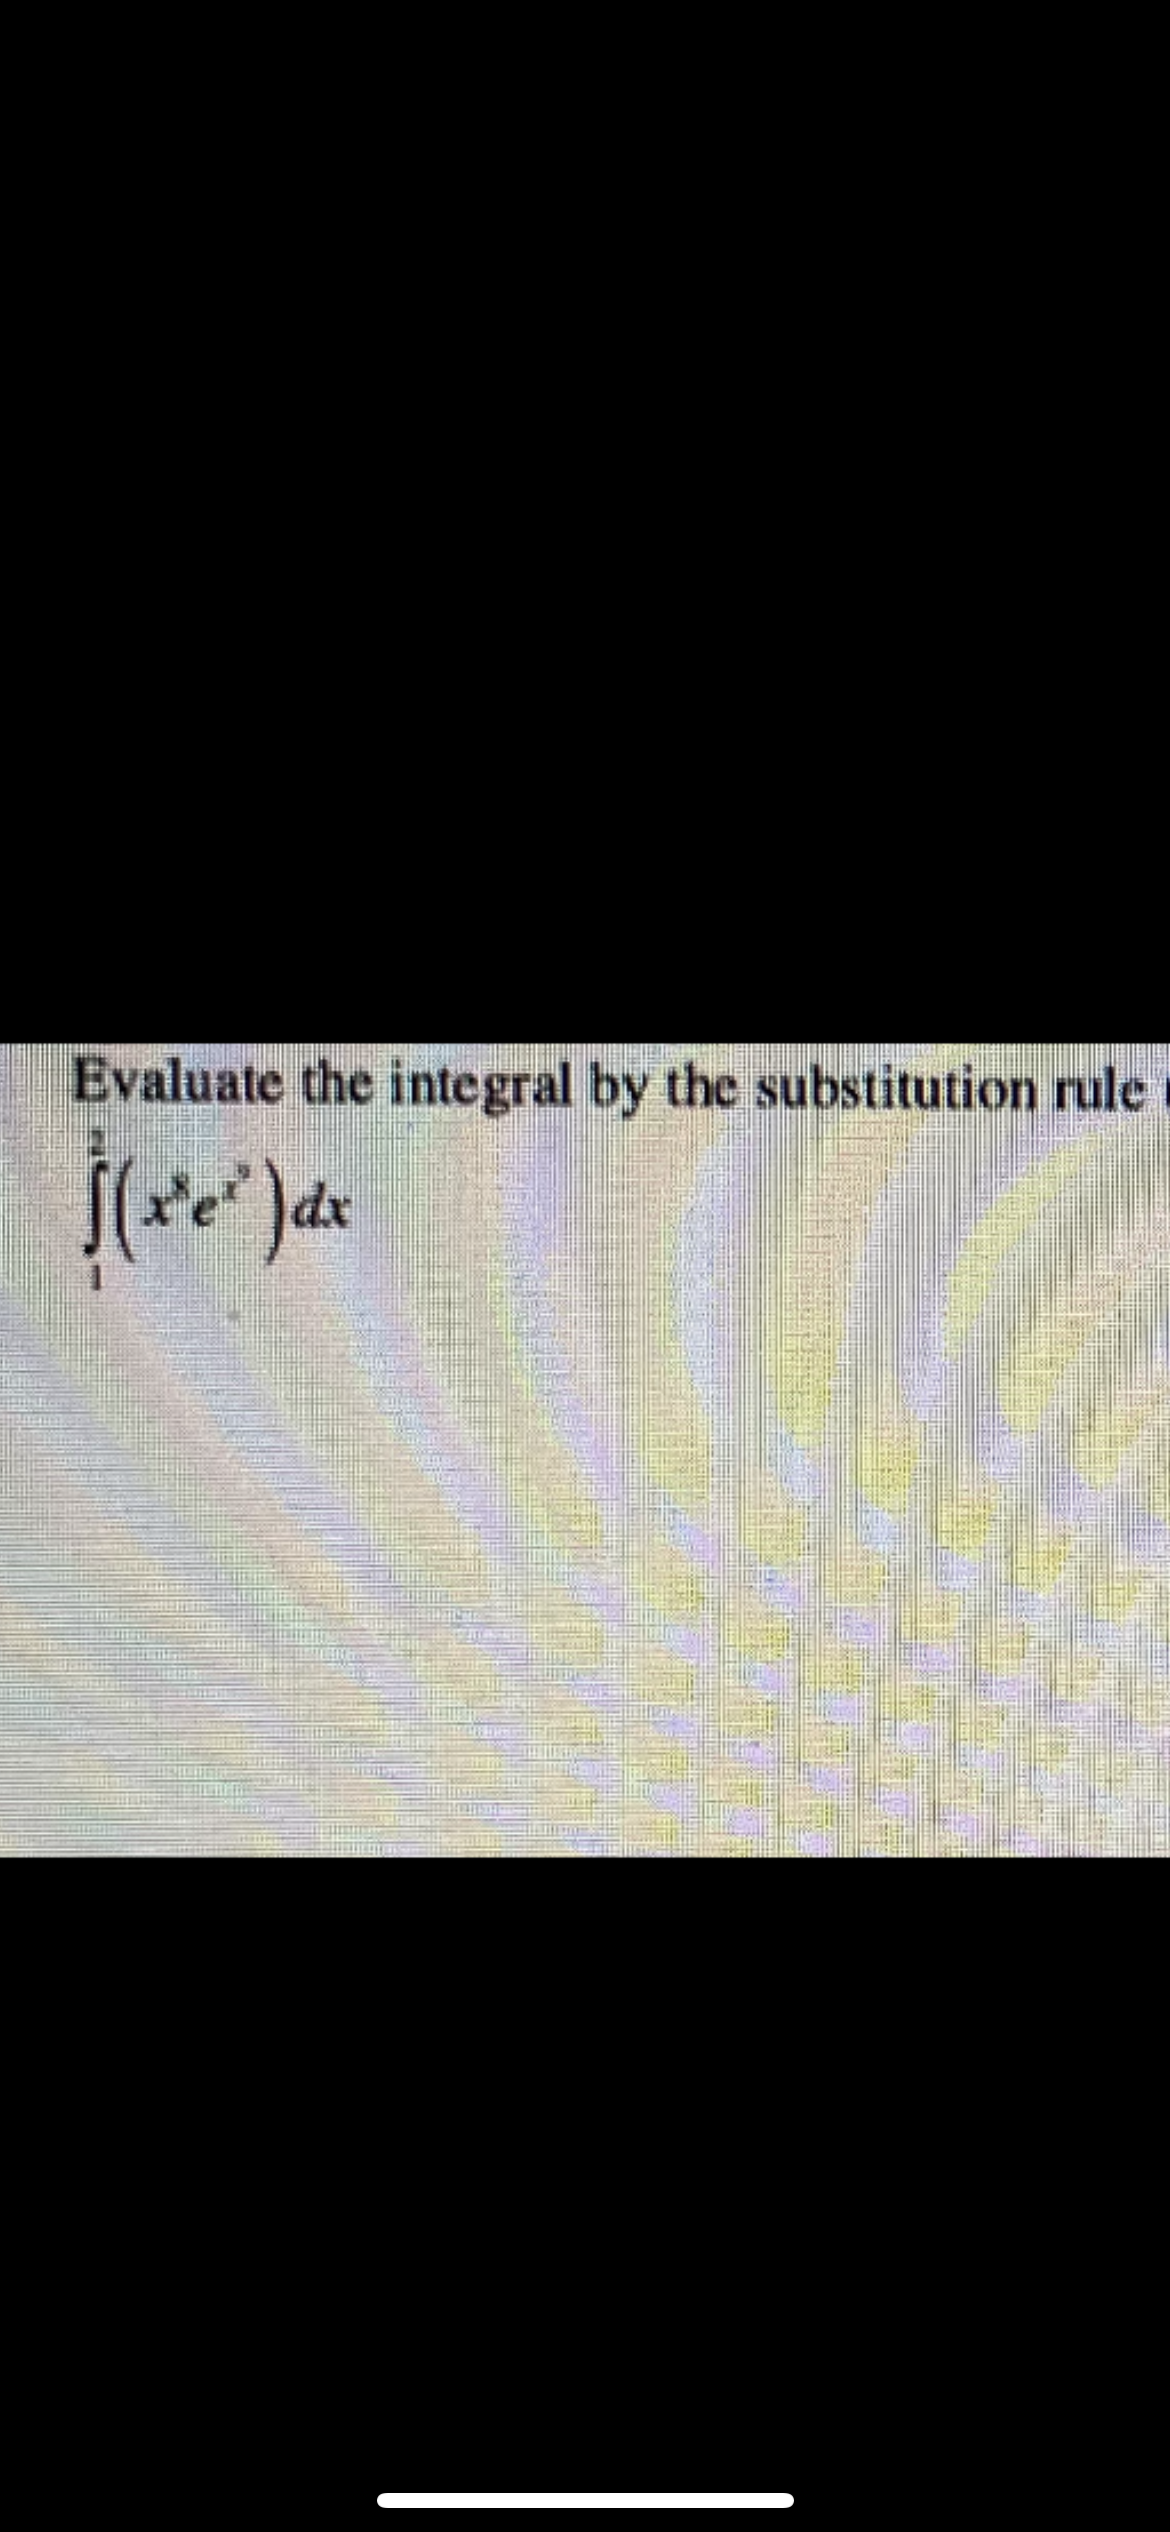 Evaluate the integral by the substitution rule
